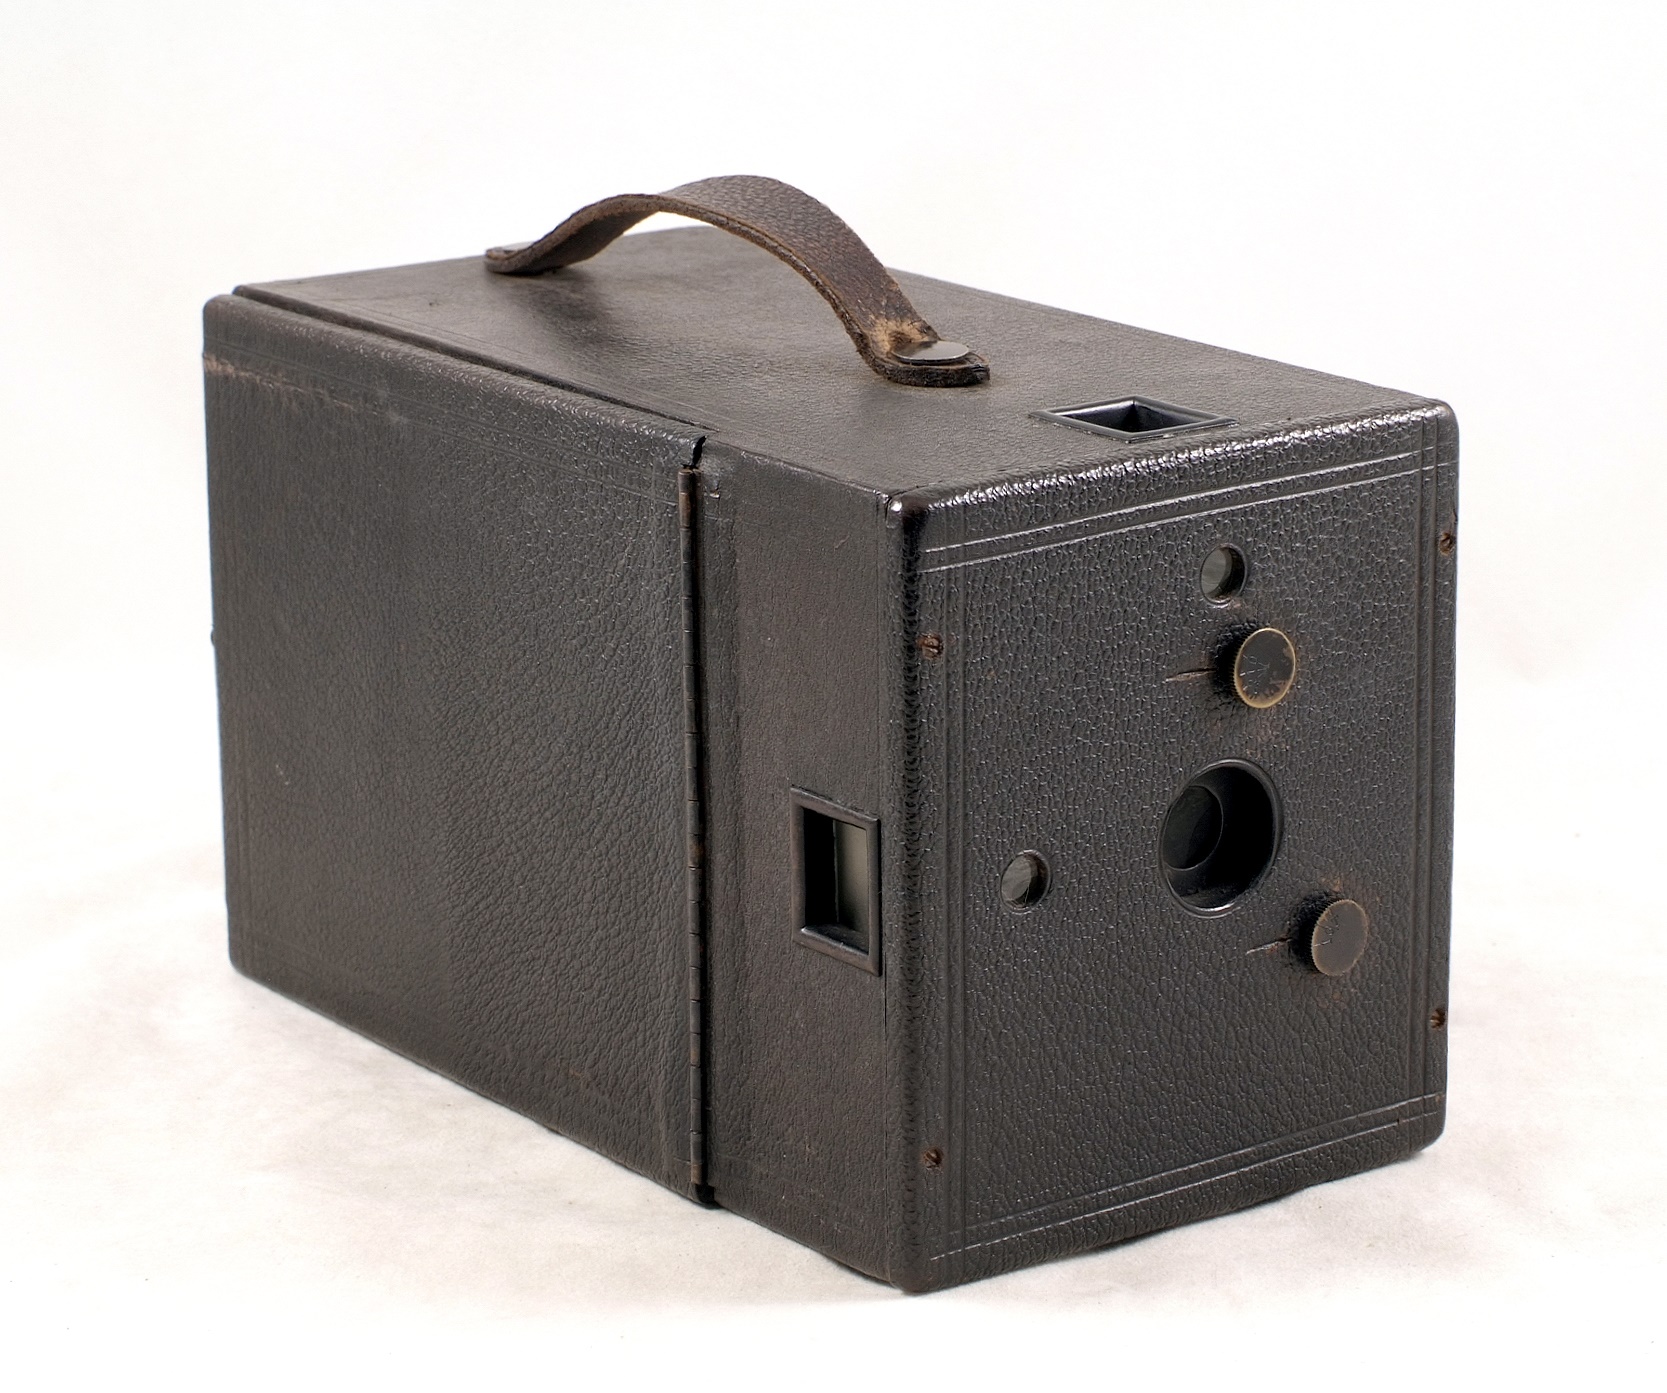 An Uncommon Vive No. 4 5x4 Plate Magazine Camera - Image 4 of 5